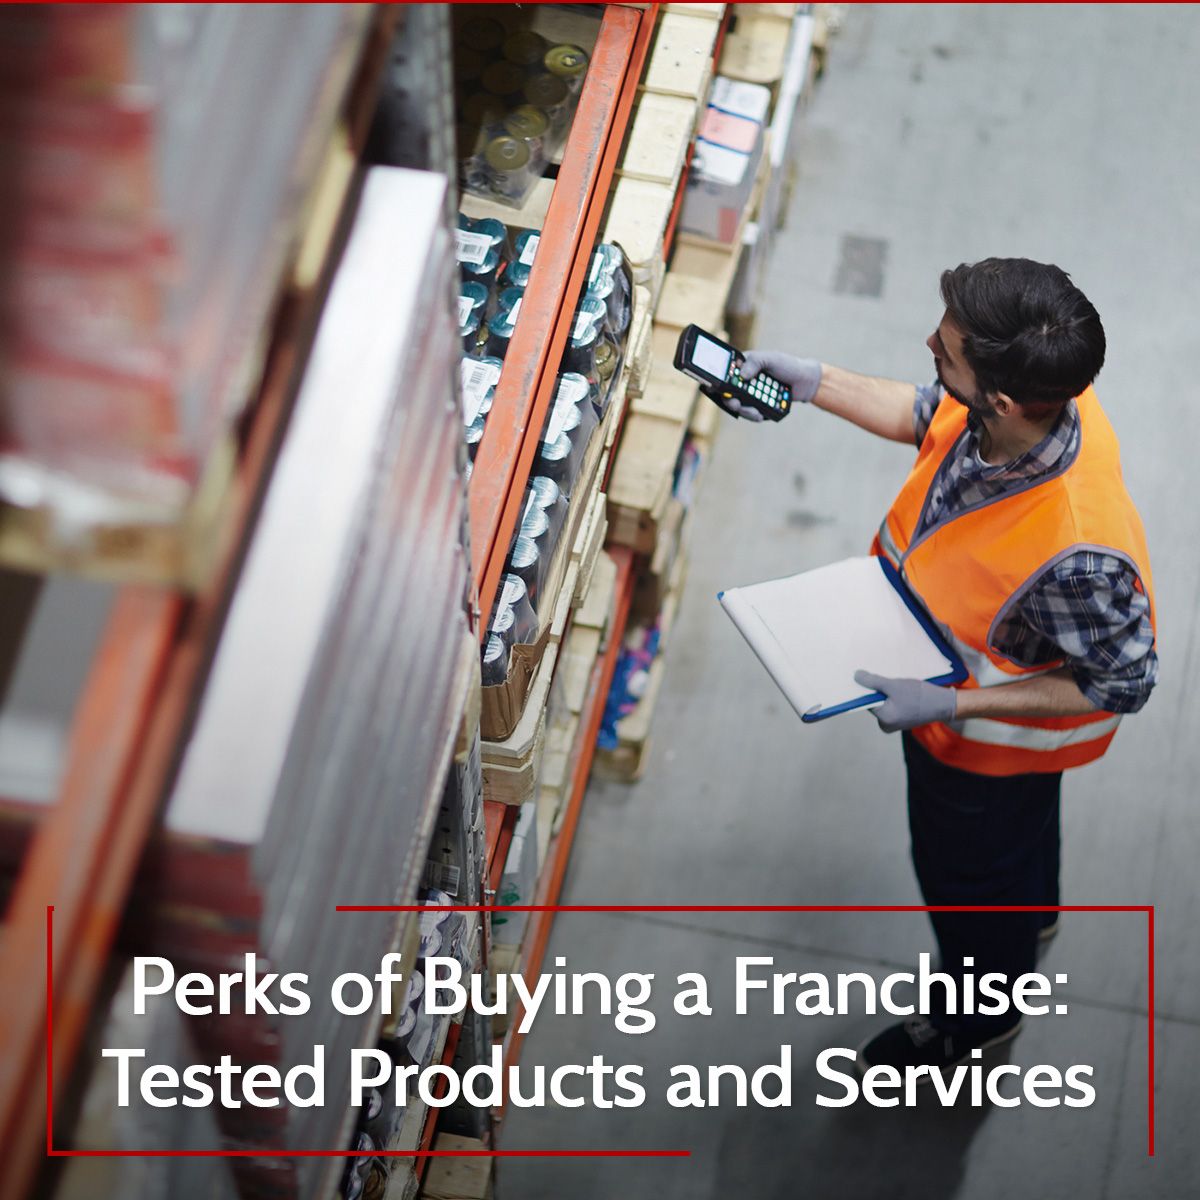 Perks of Buying a Franchise: Tested Products and Services